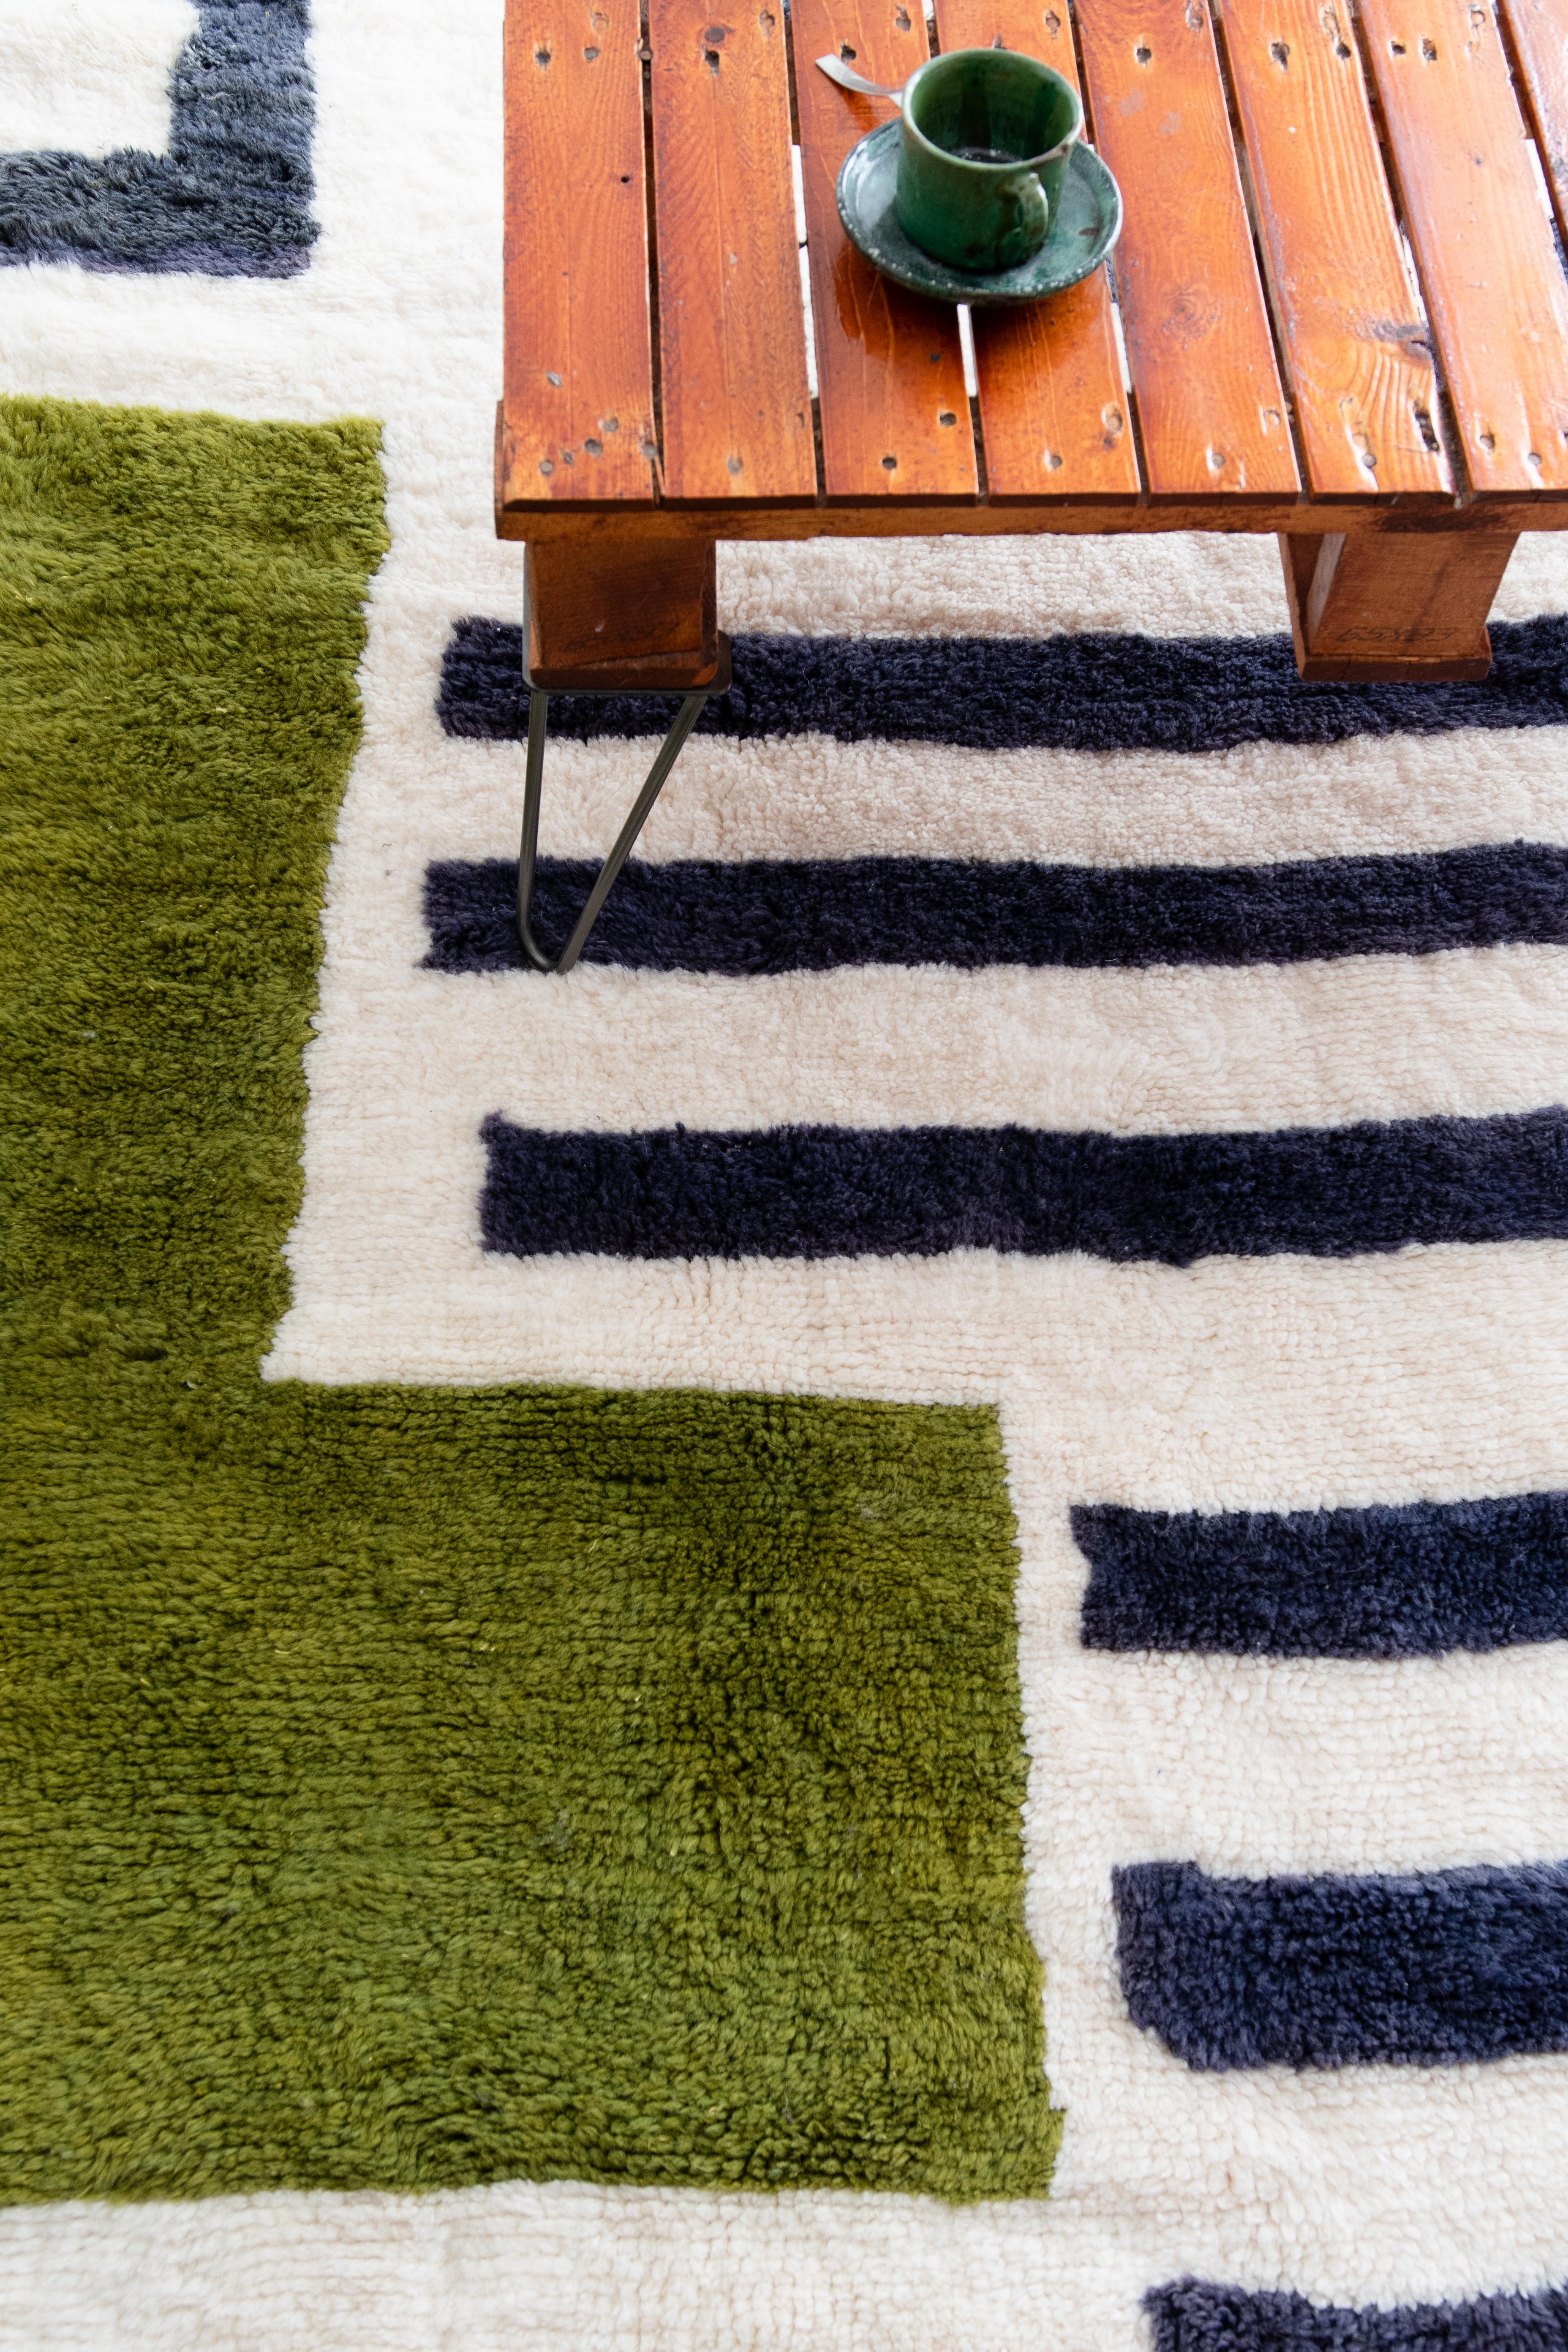 Name of the rug : Shield 
Colors : Green, Blue and White
Material : 100% Natural Wool.
Designer : Garance Tresarrieu
Location : Designed in Paris & Handmade in Morocco 

Designed in Paris by the talented Garance Tresarrieu and handmade using the